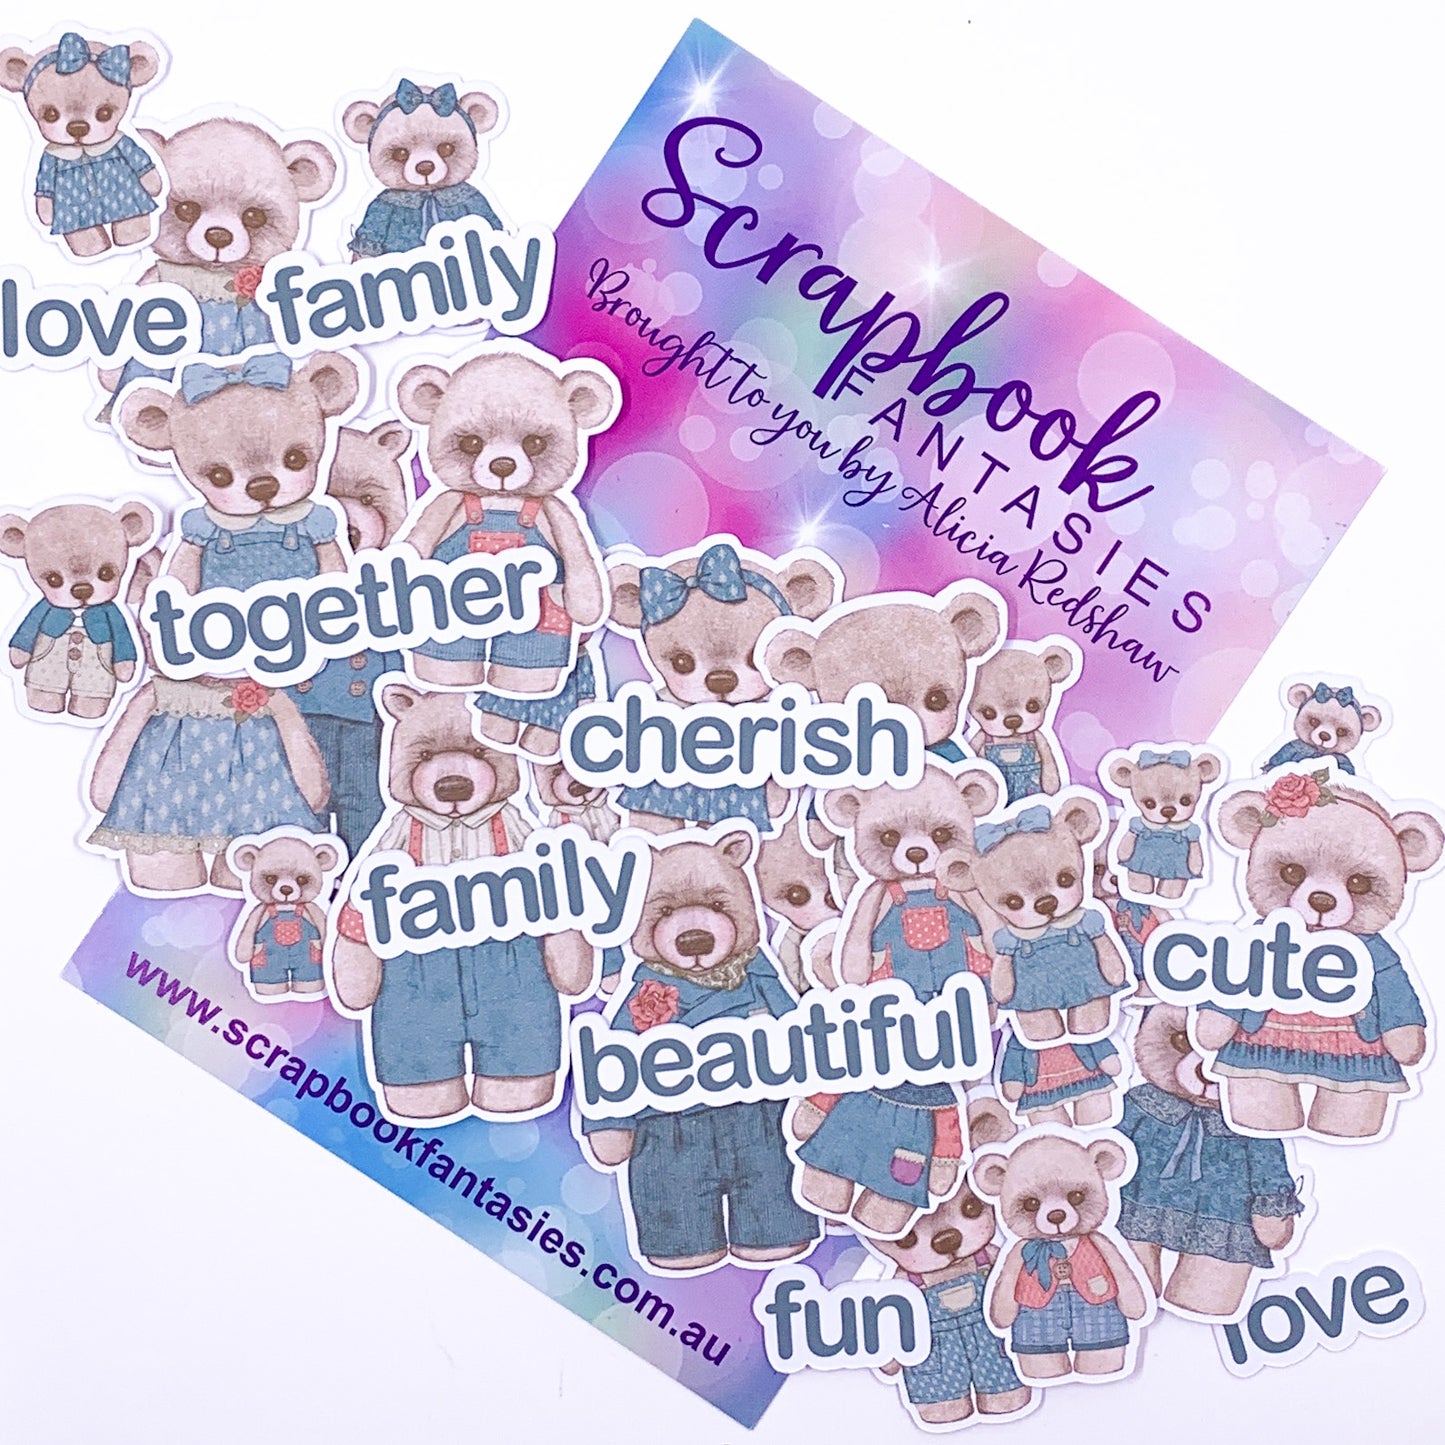 Beautiful Family - Bears & Words 8 Colour-Cuts (35 pieces) Teal & Cream - Designed by Alicia Redshaw